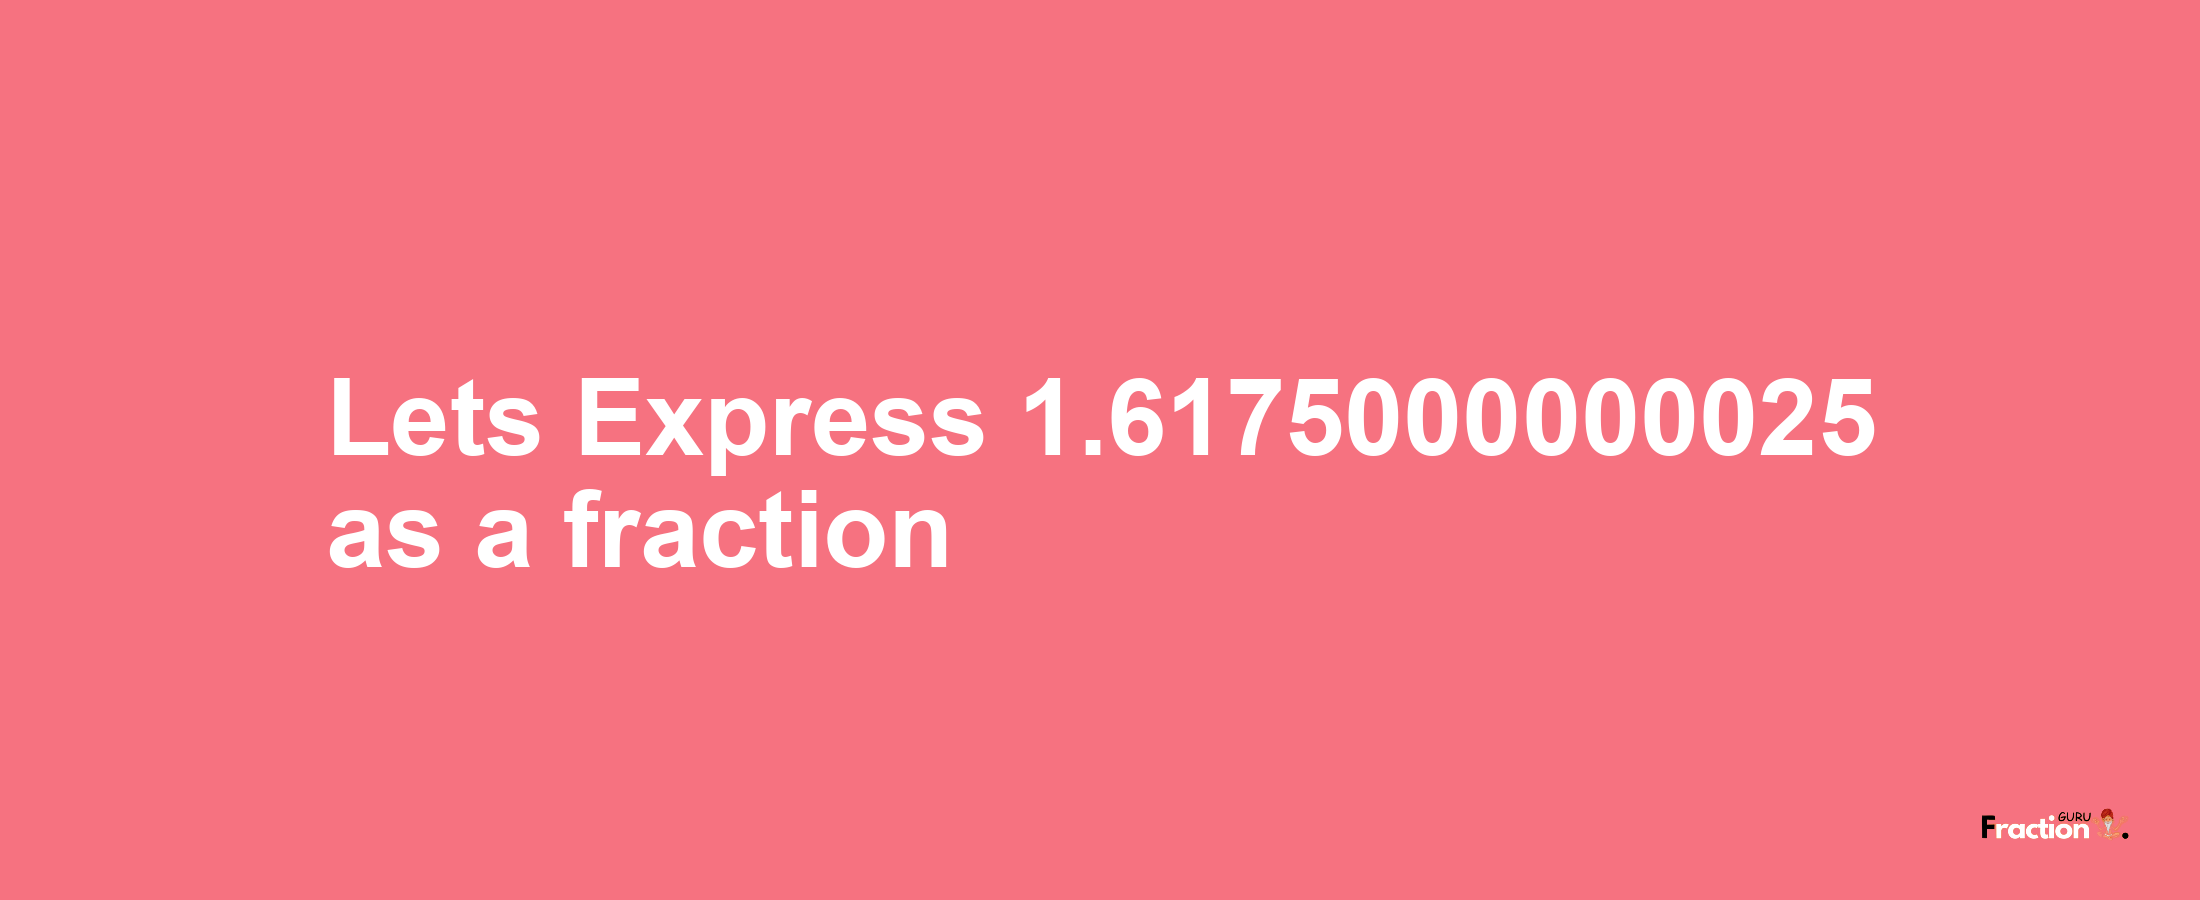 Lets Express 1.6175000000025 as afraction